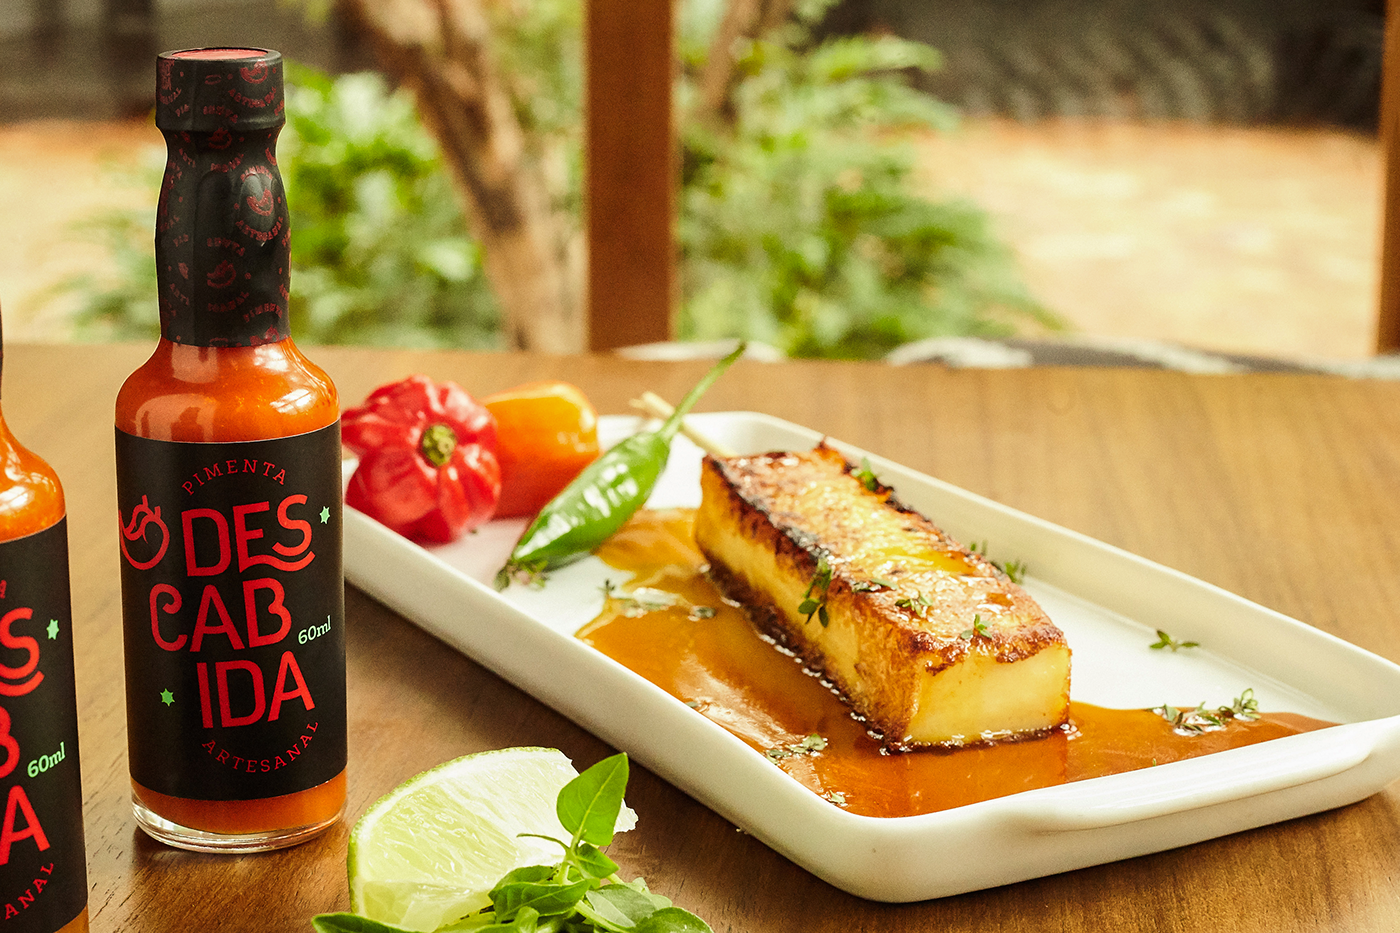 Pimenta descabida chili red pepper packing Display Food  sauce